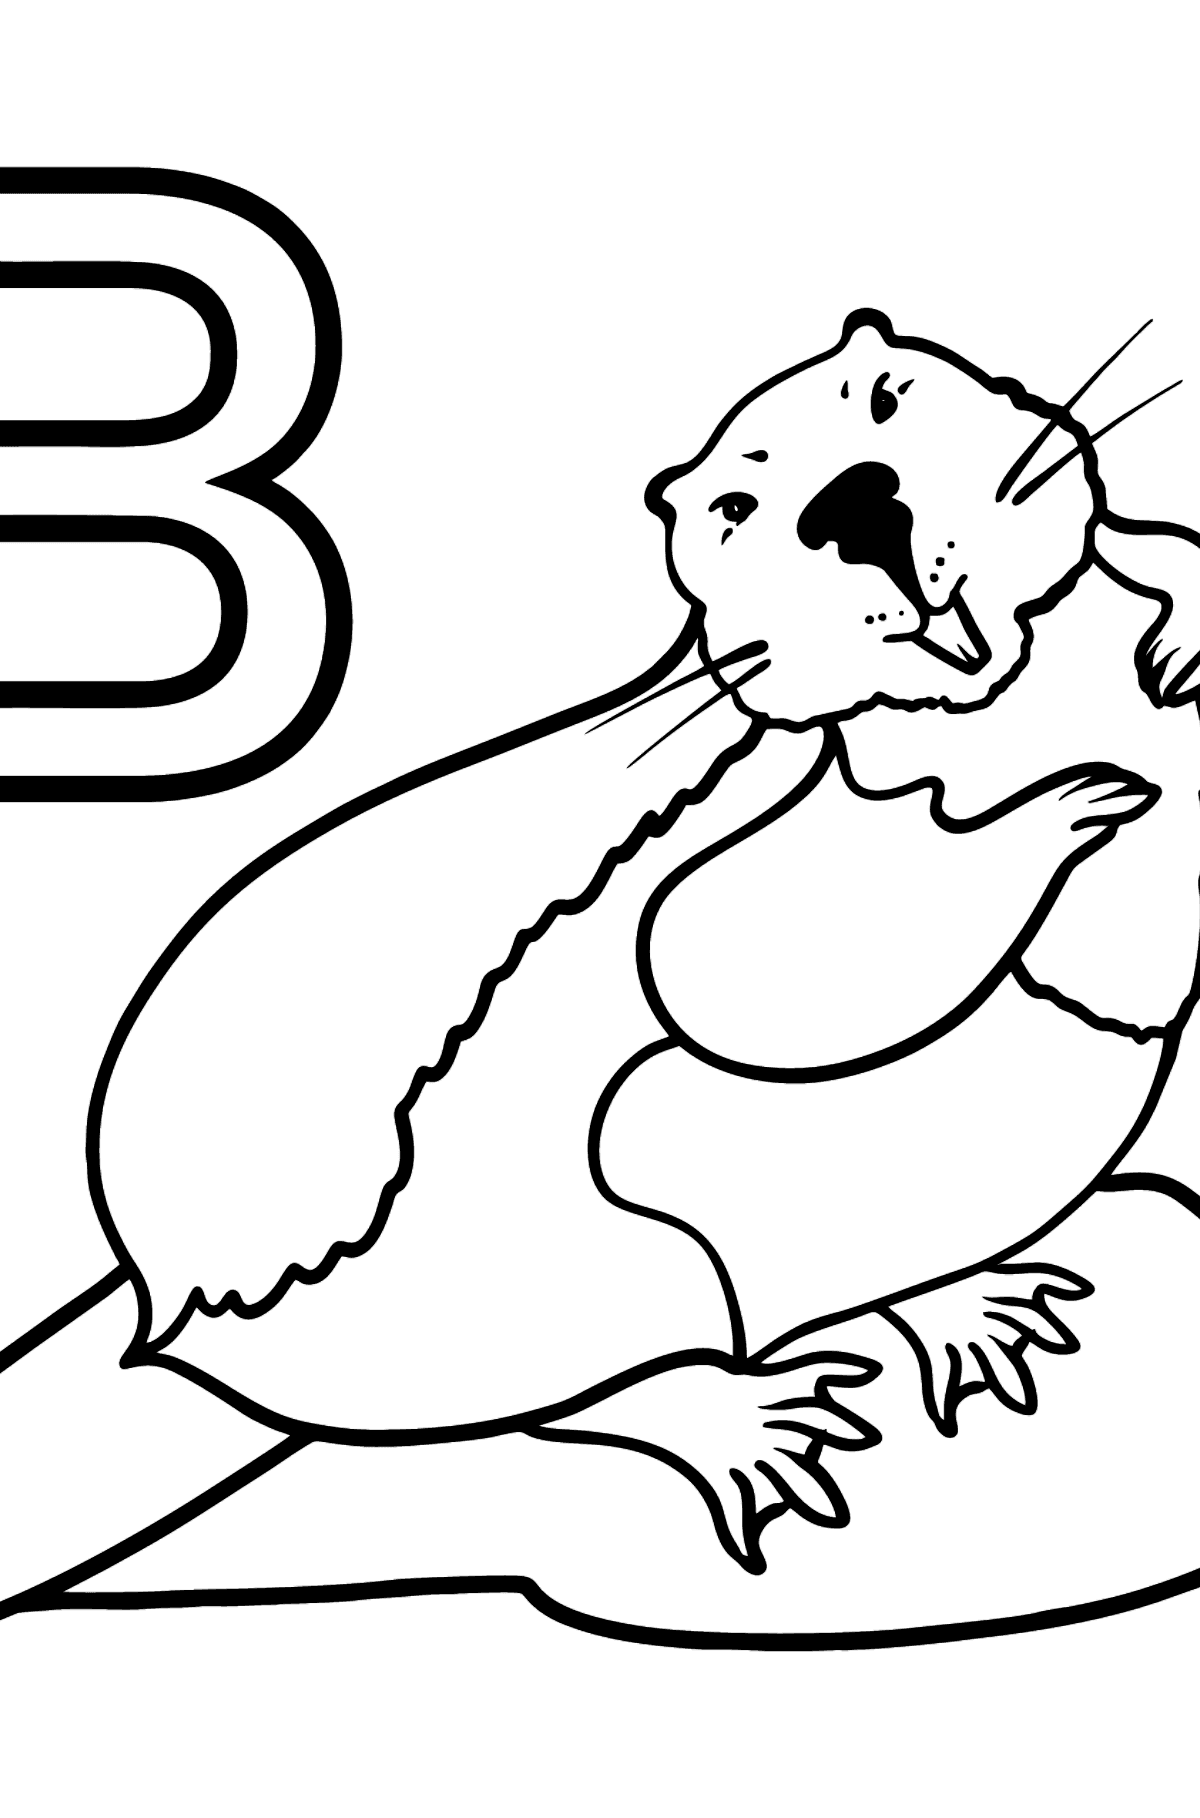 English Letter B coloring pages - BEAVER - Coloring Pages for Kids